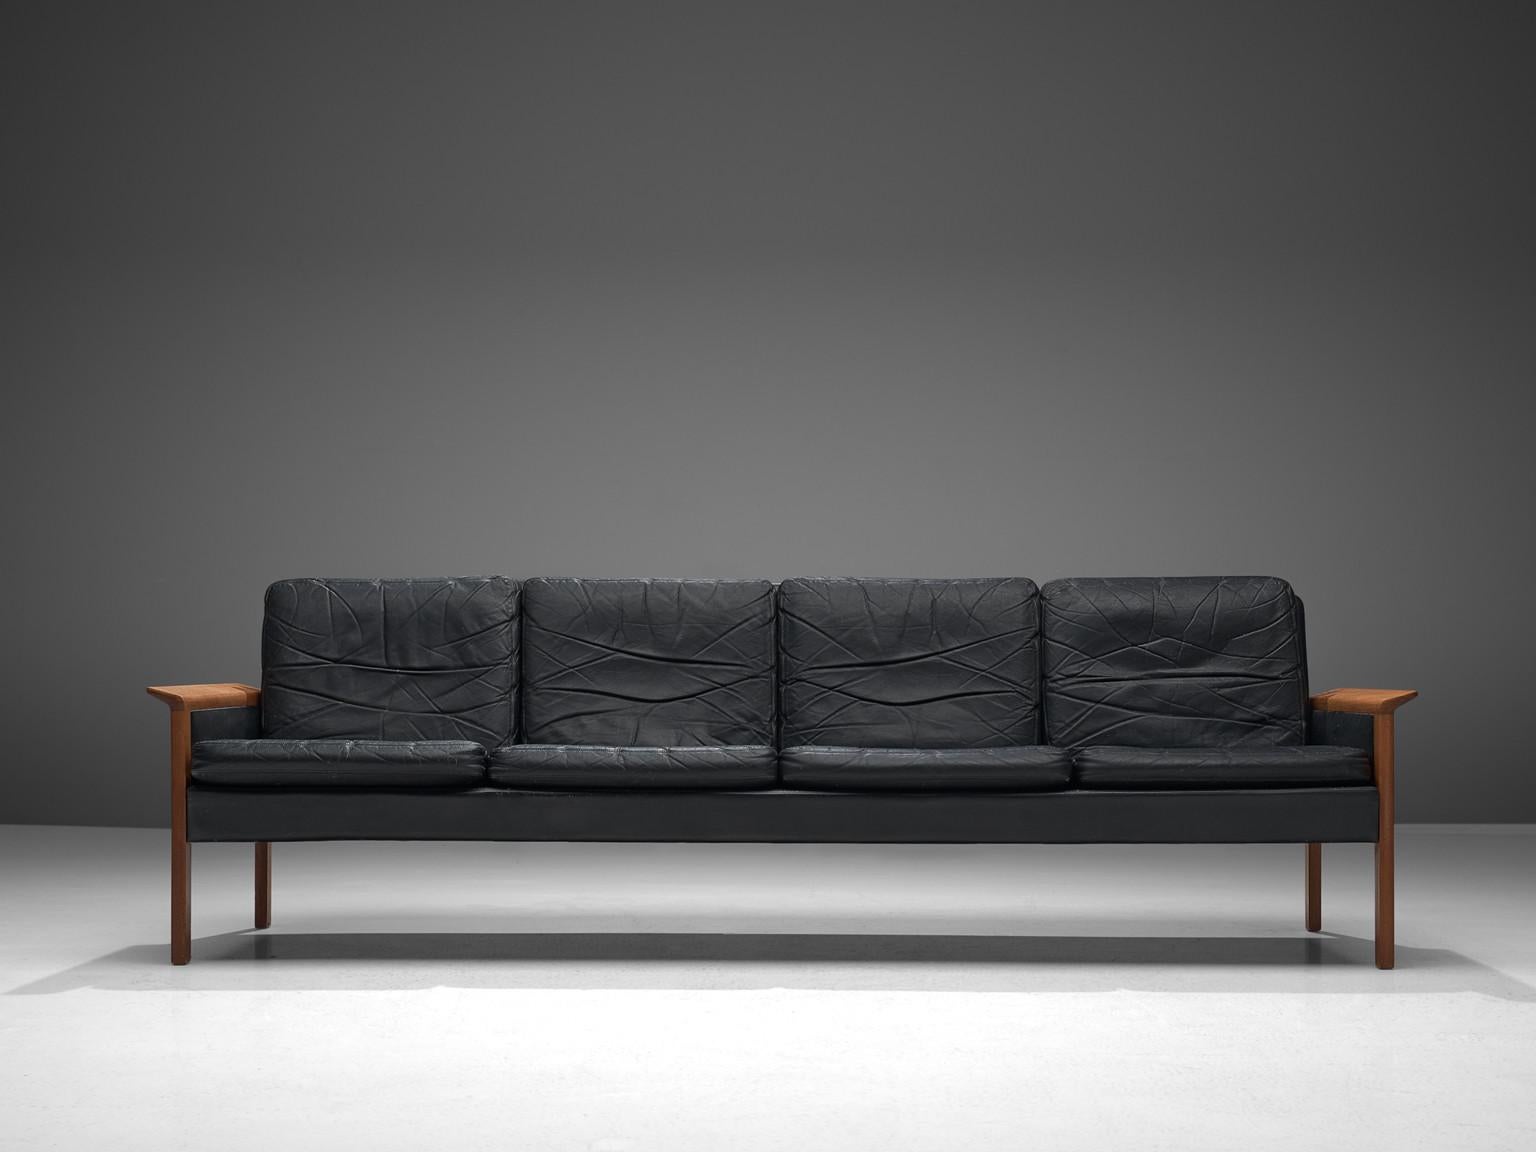 Hans Olsen for Brande, leather, teak, Denmark, circa 1960

This leather four seat sofa is designed by the Dane Hans Olsen for Brande. The sofa is executed in black leather that has beautifully patinated due to age. The sofa has a clean, modest